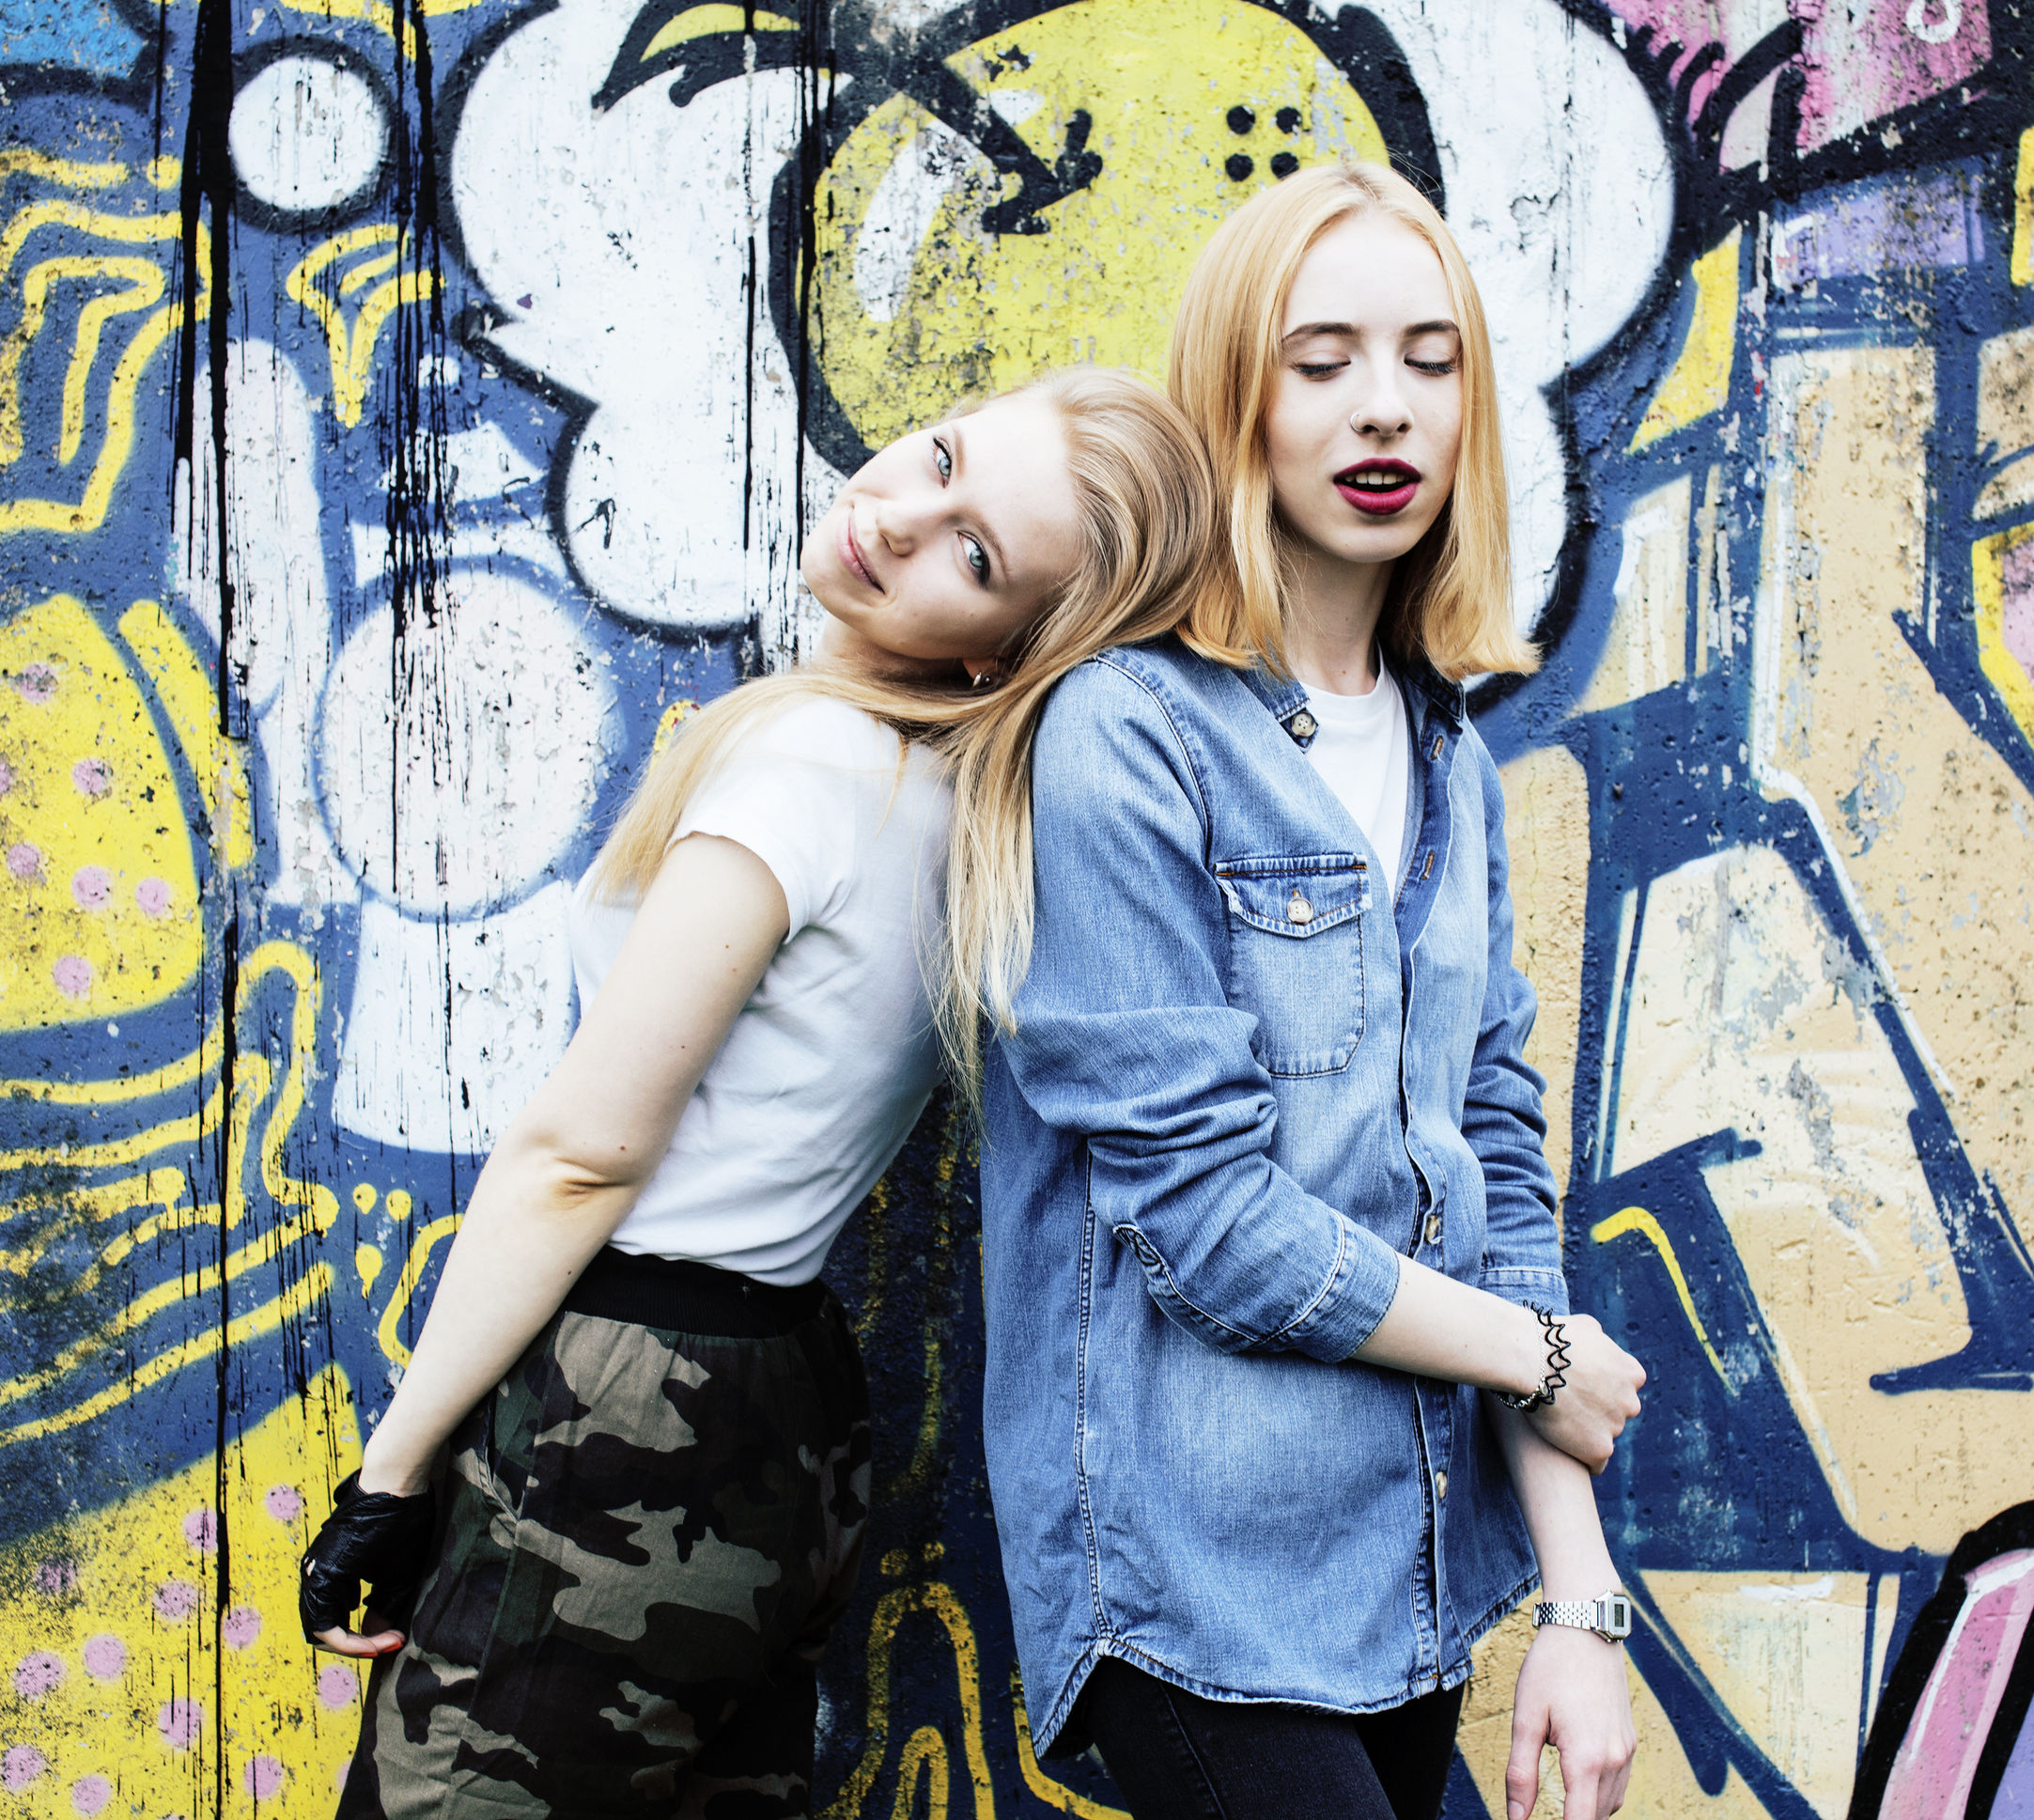 65386366 - two blonde real teenage girl hanging out at summer together best friends, lifestyle people concept close up